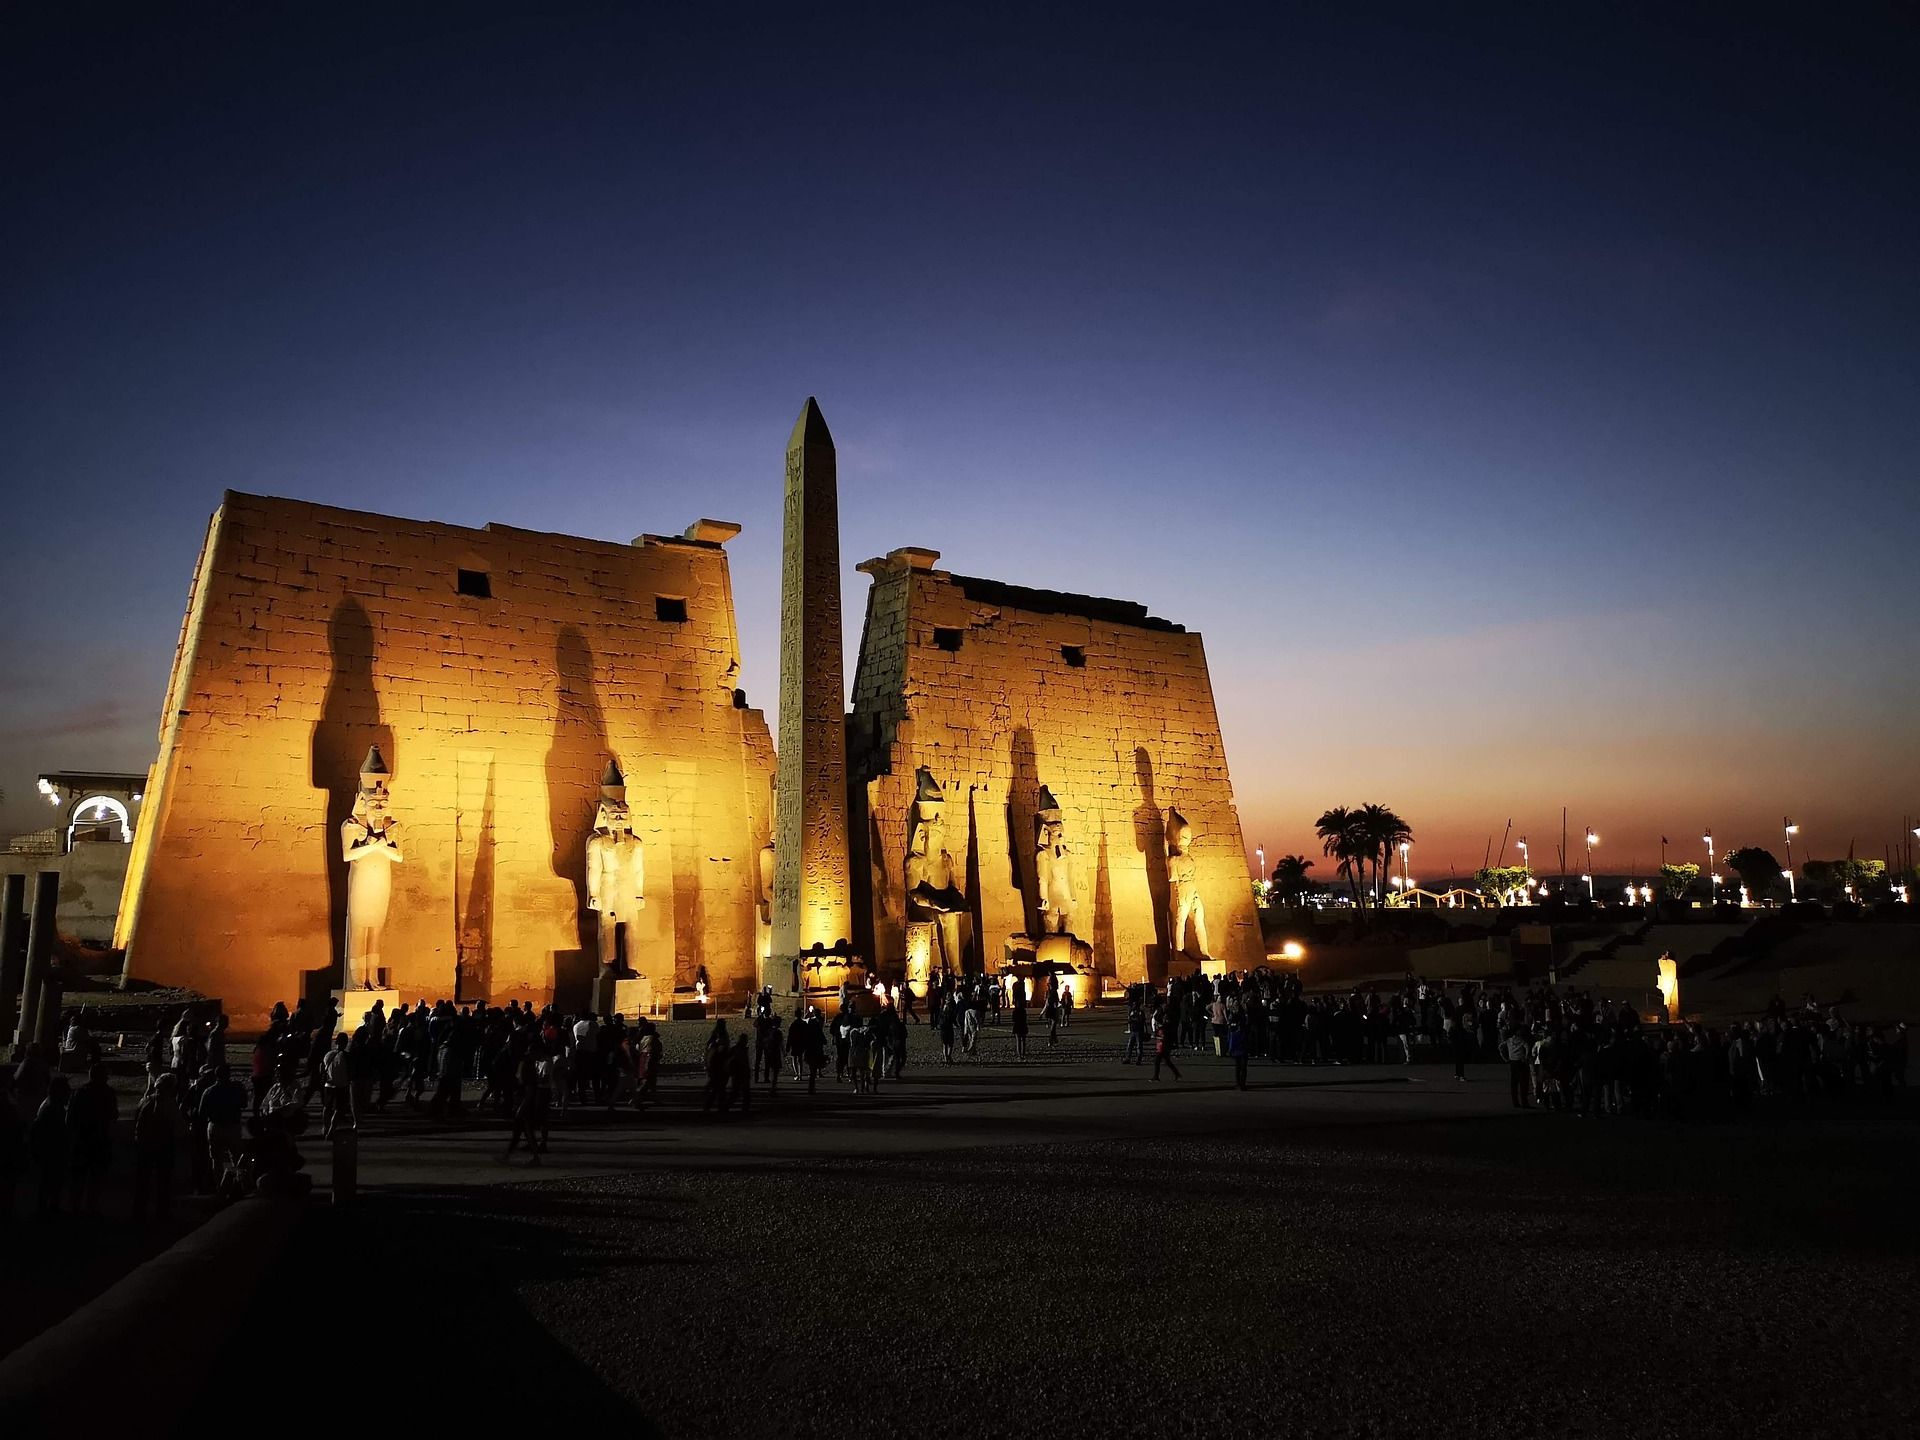 The Luxor Temple in Egypt at night 